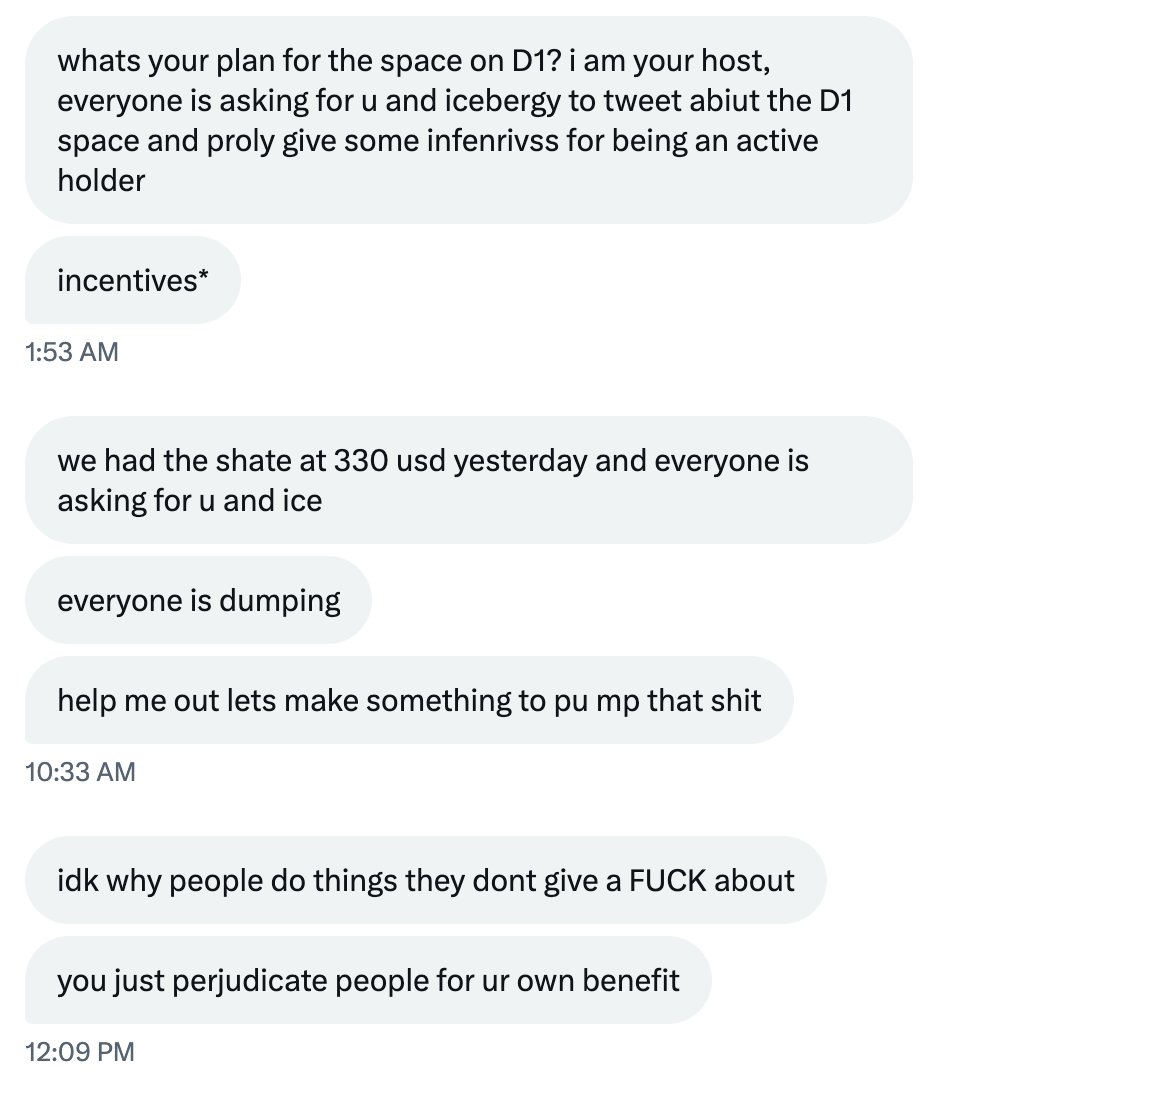 cannot recommend using district one (looks like discord with a blast skin. not sure if the app does something else) ciniz simply testing a new app on blast...few hours later? messages like this from many anons in replies and dms...non stop